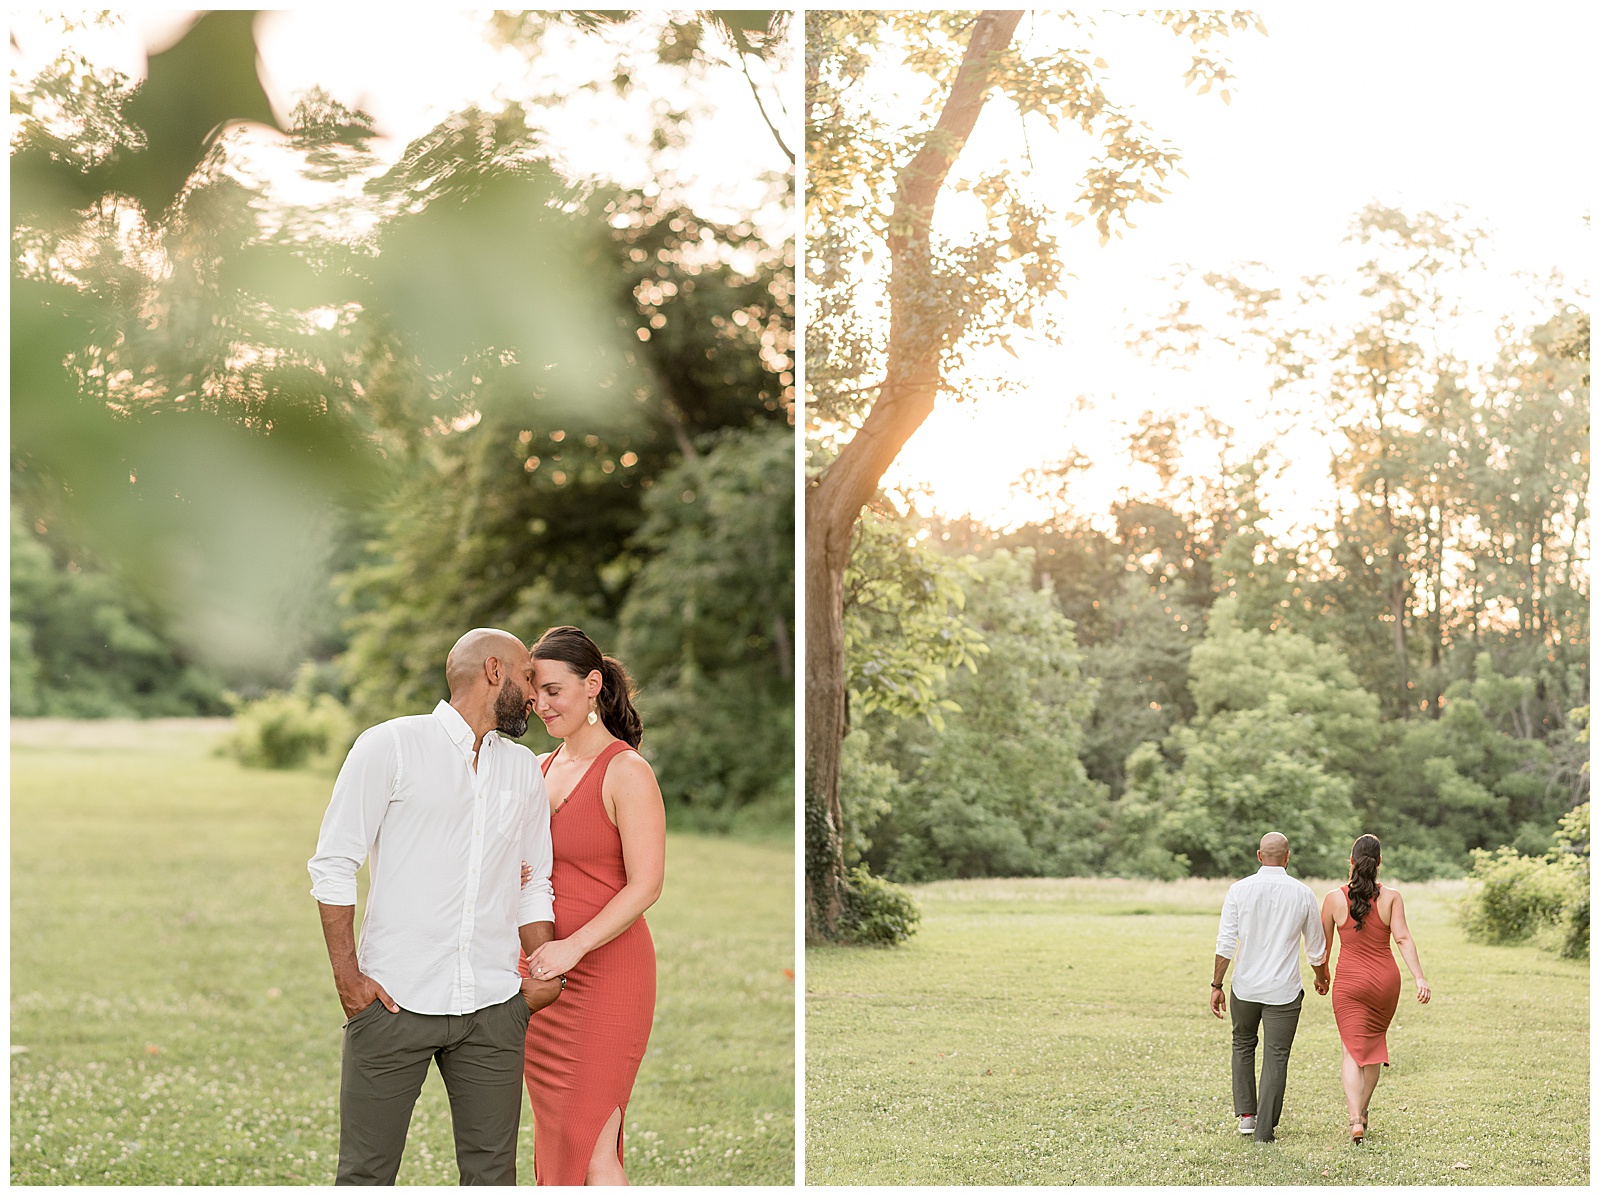 engaged couple stands close smiling by trees in grass lawn on sunny summer evening